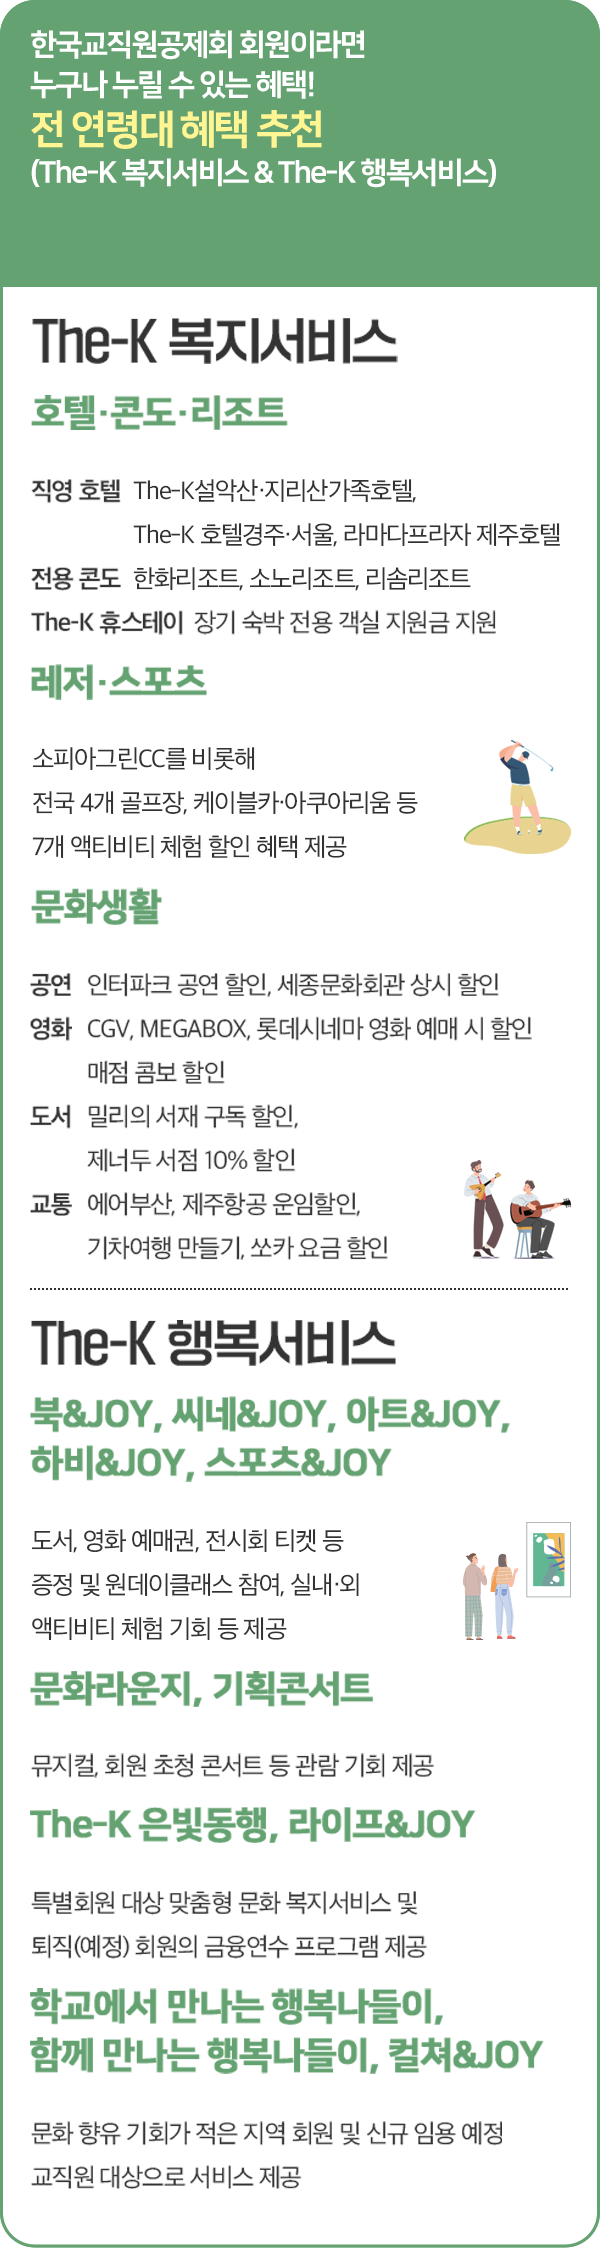 The-K 포커스 2_01